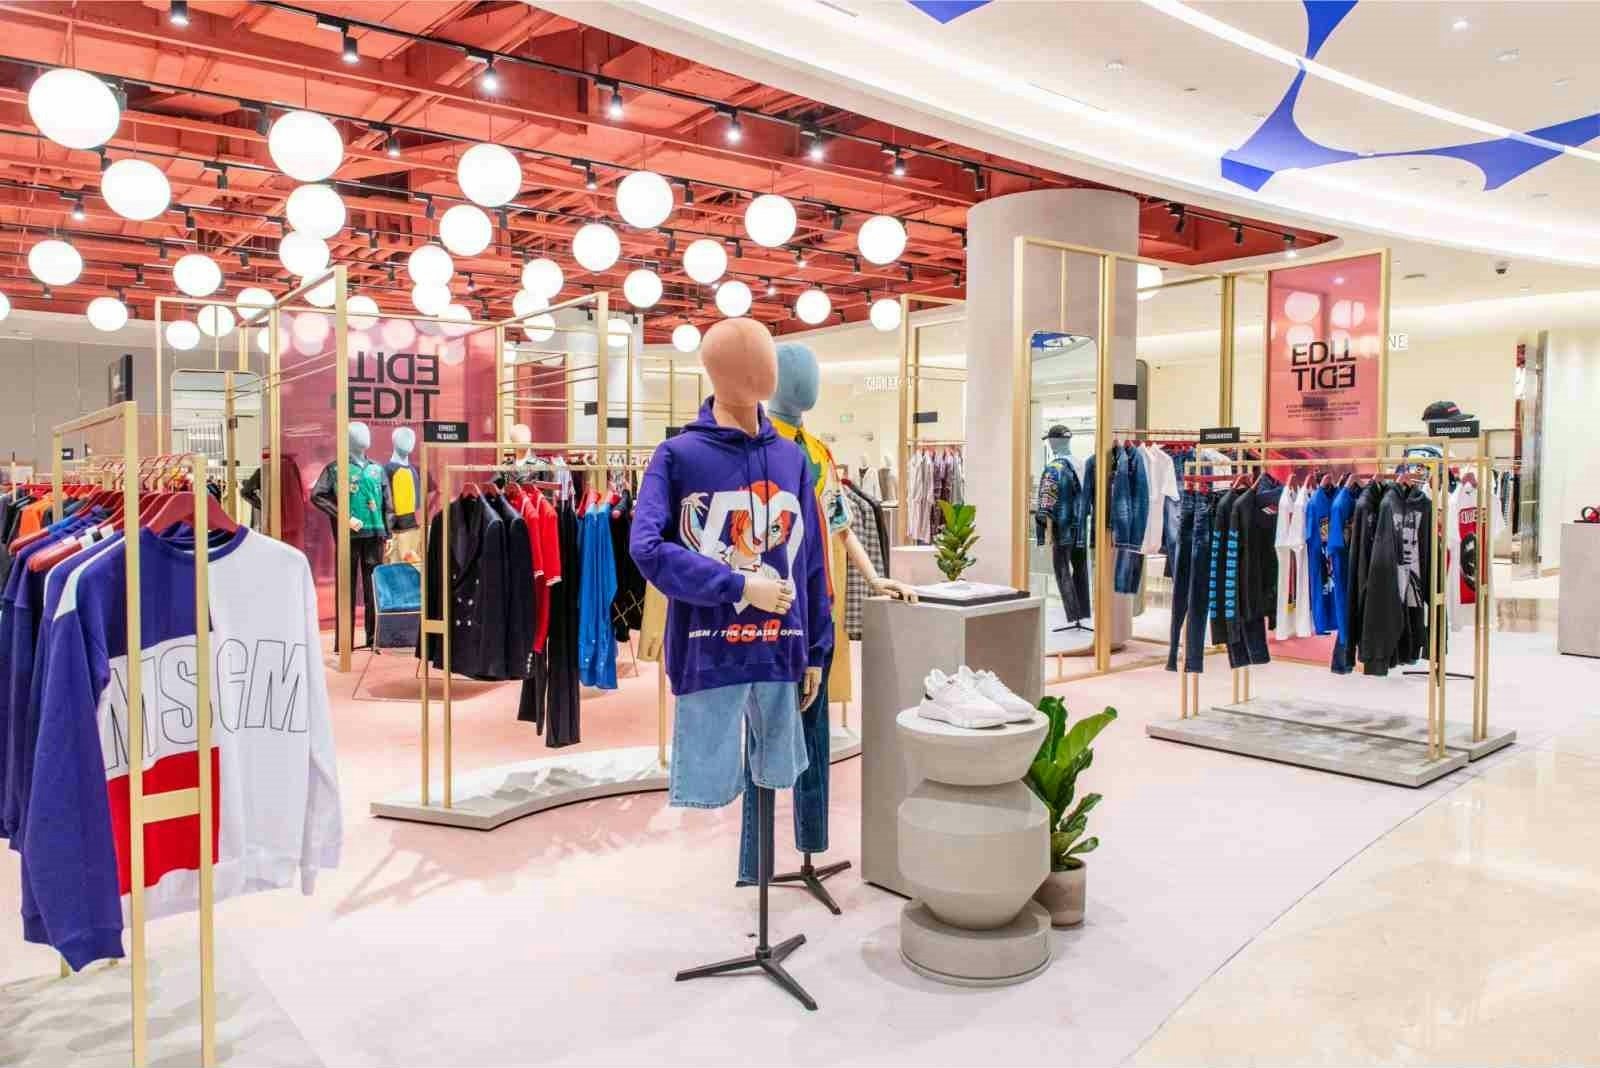 By eschewing mainstream luxury brands and focusing on niche labels, Galeries Lafayette has created a unique selling point for itself in Shanghai, although one that also comes with risk. Courtesy photo